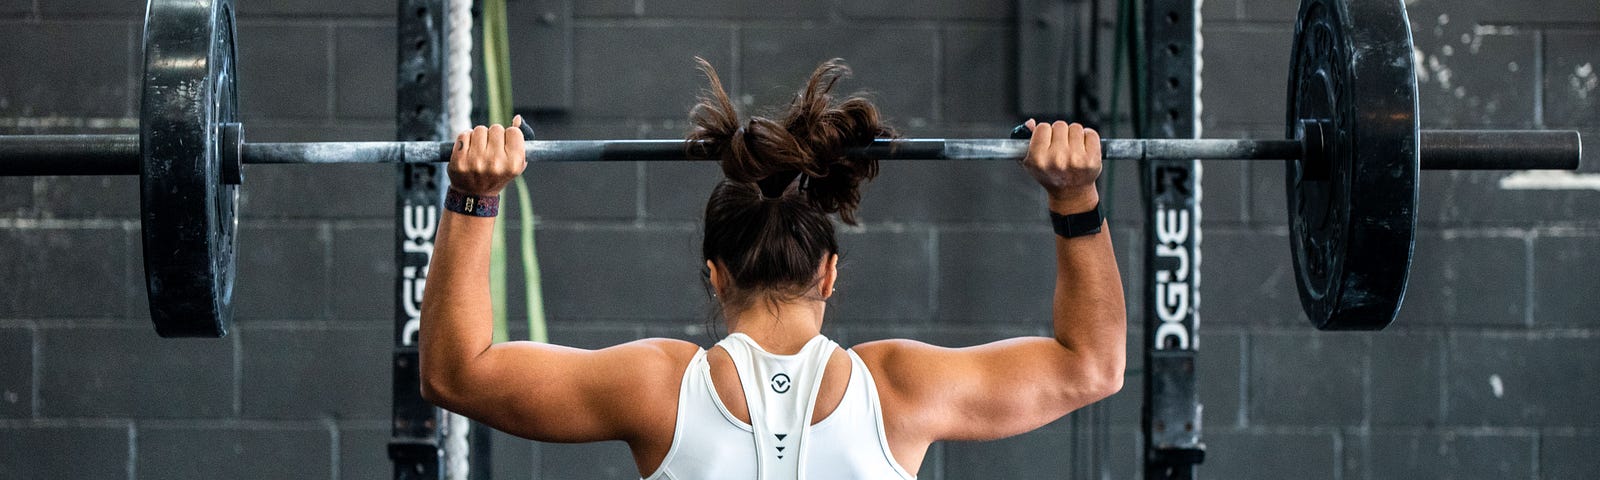 woman lifting a barbell, photo showing her backside